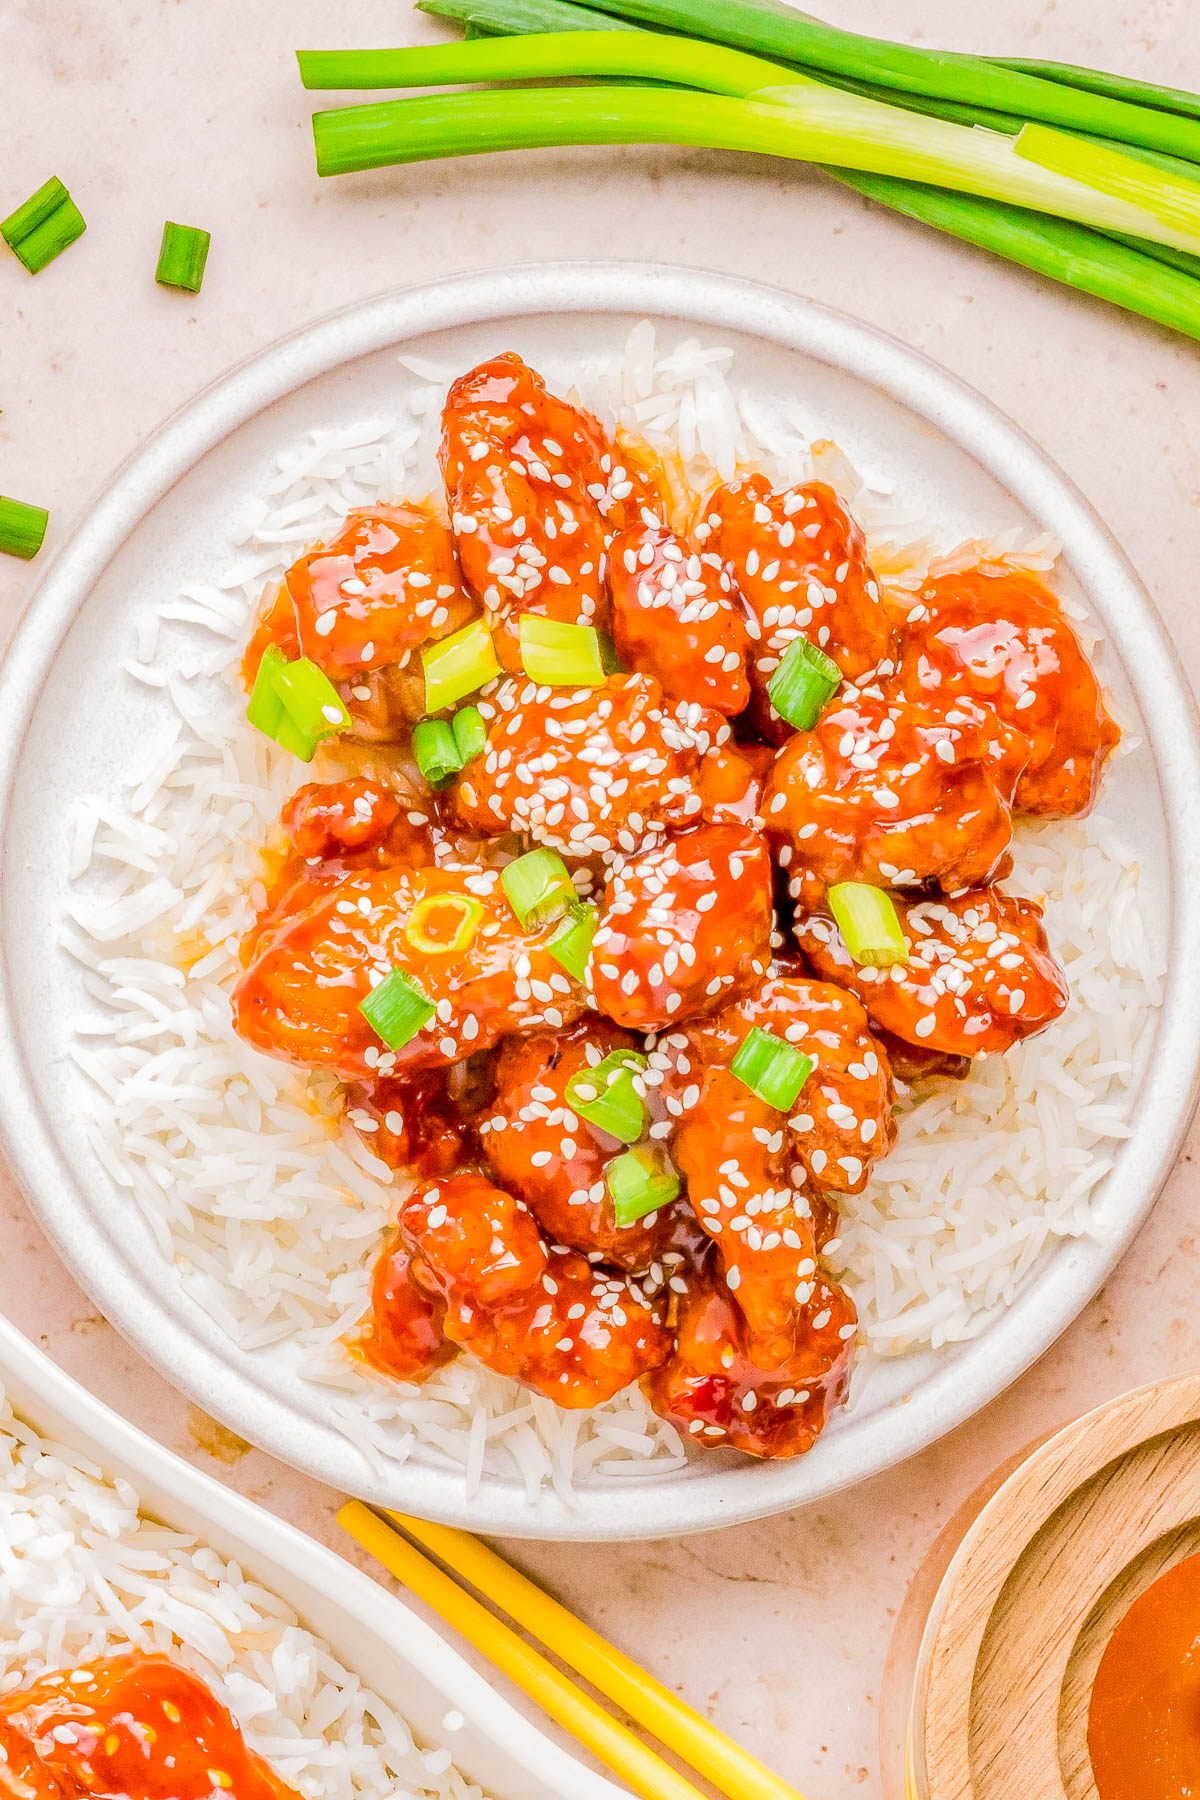 A plate of sesame chicken served over white rice, garnished with green onions and sesame seeds, with chopsticks on the side.